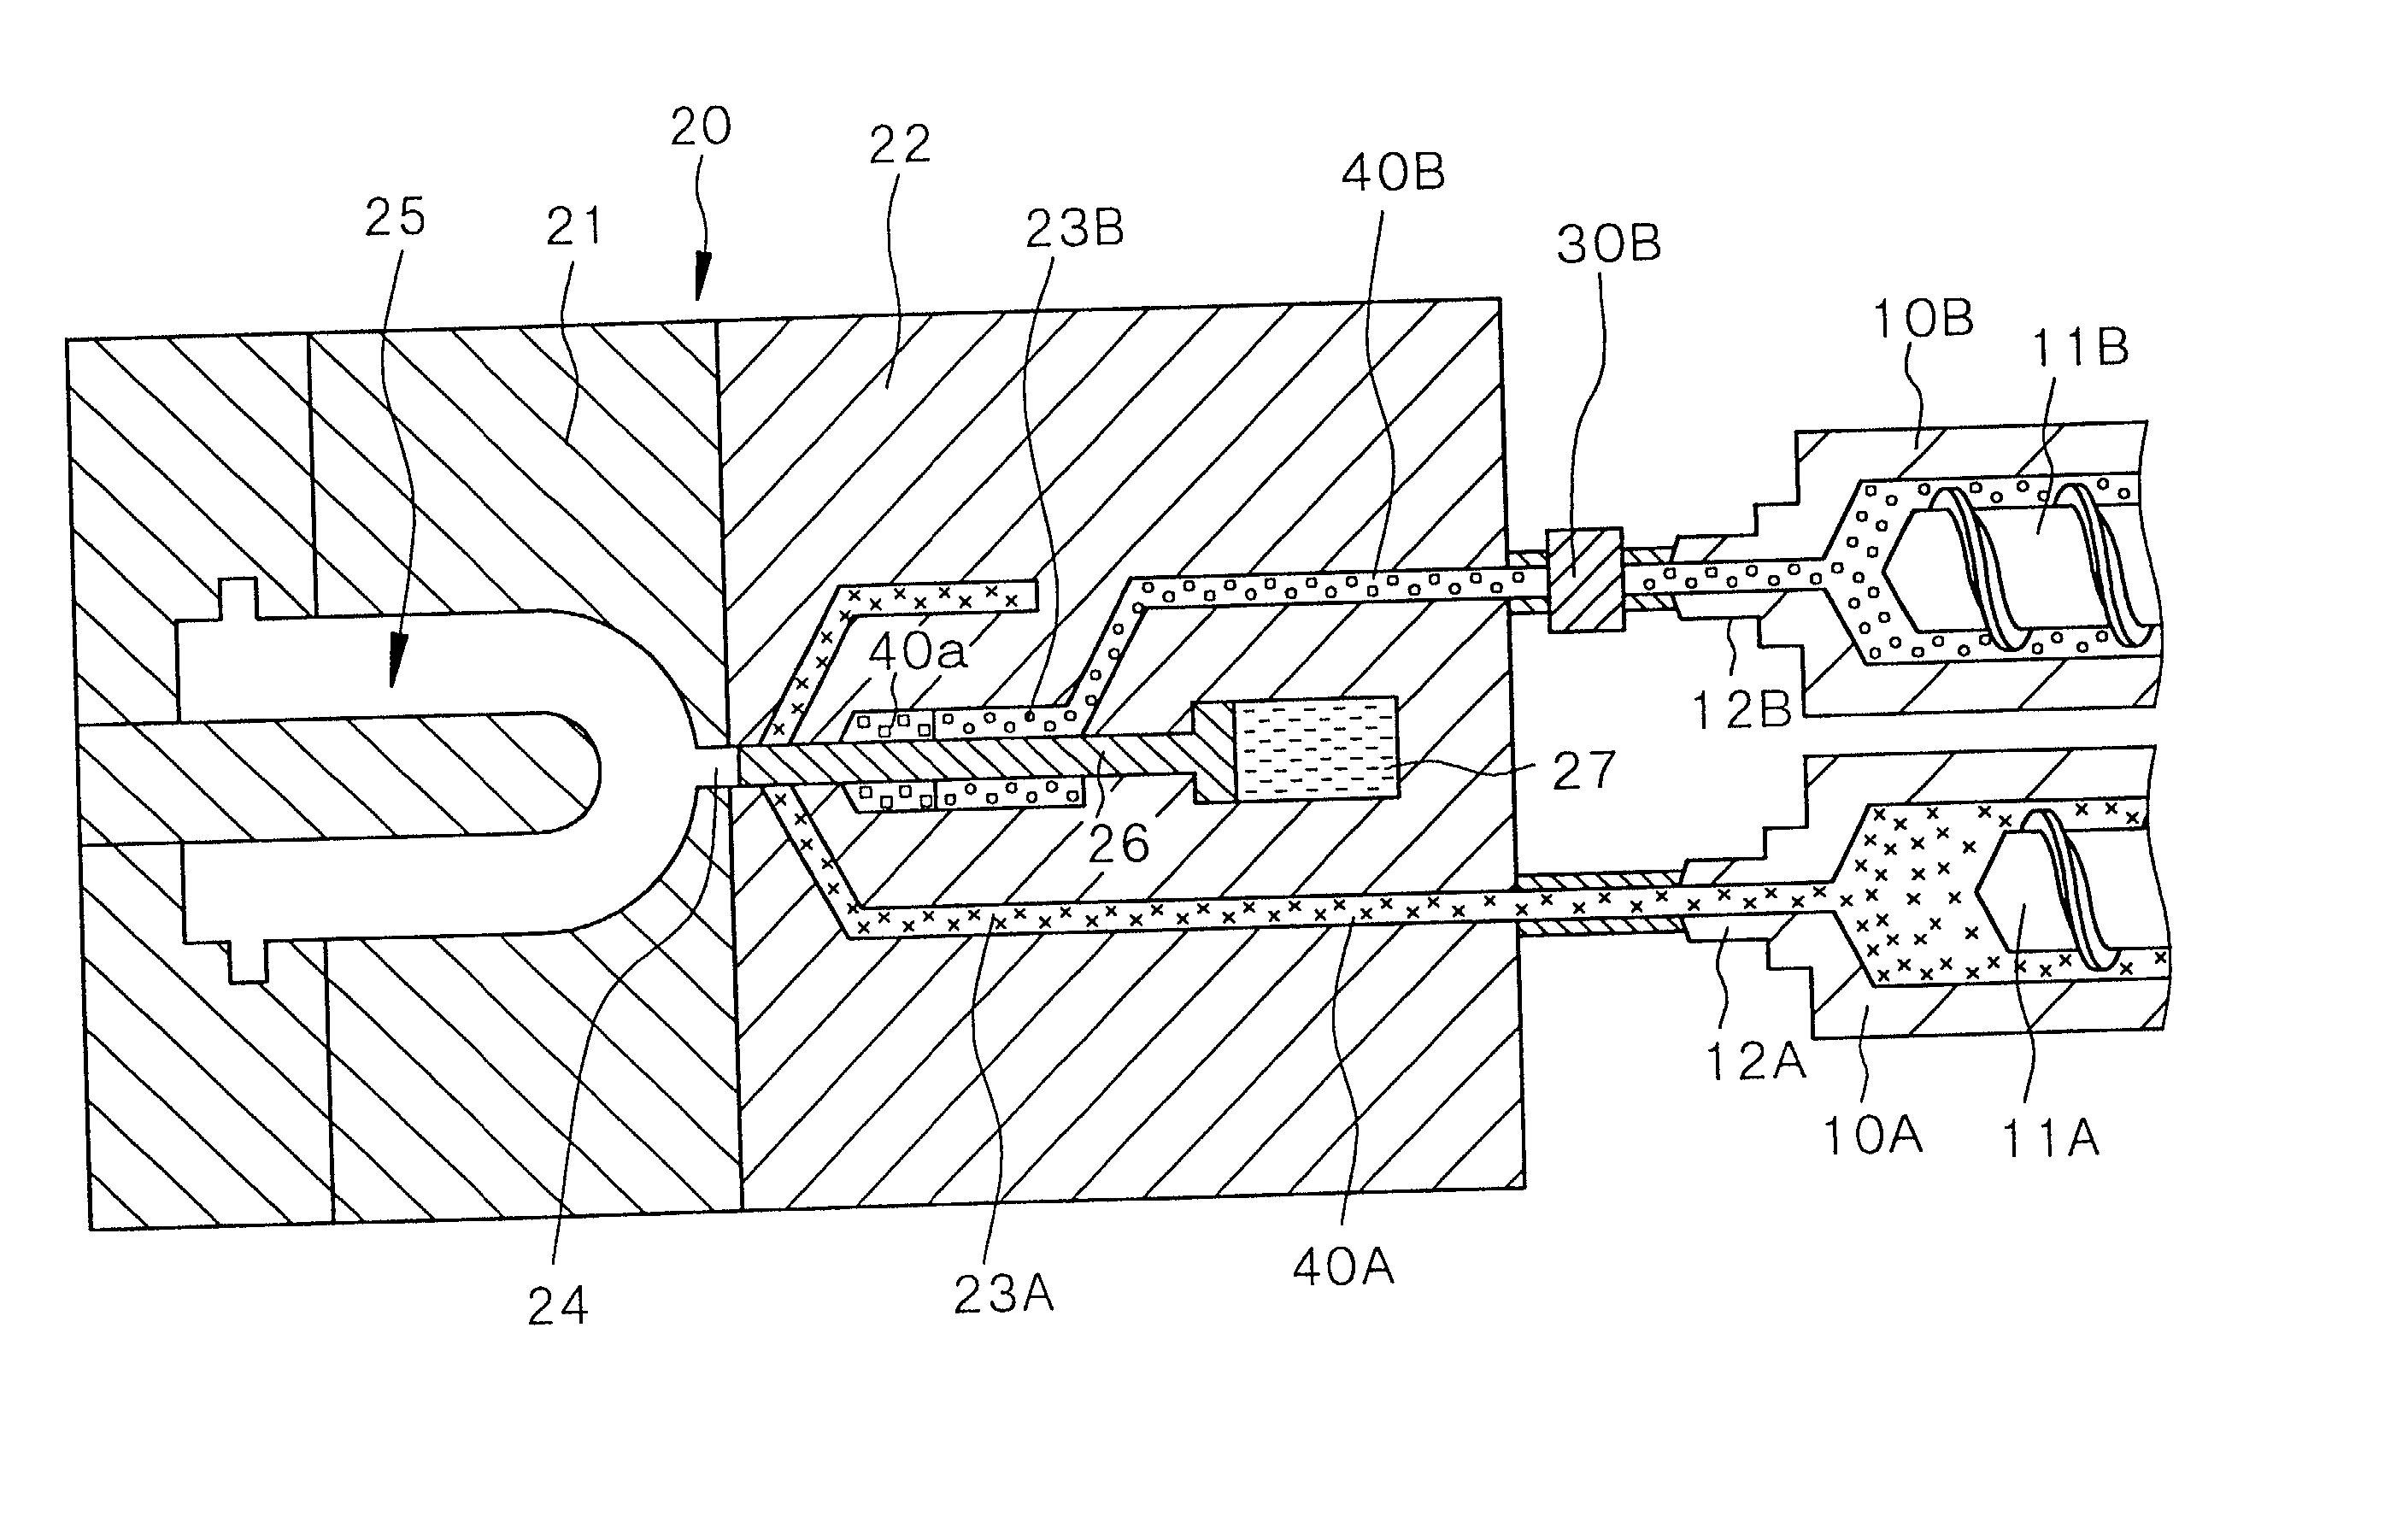 Injection molding apparatus for molding multi-layered article and method of injection-molding multi-layered article